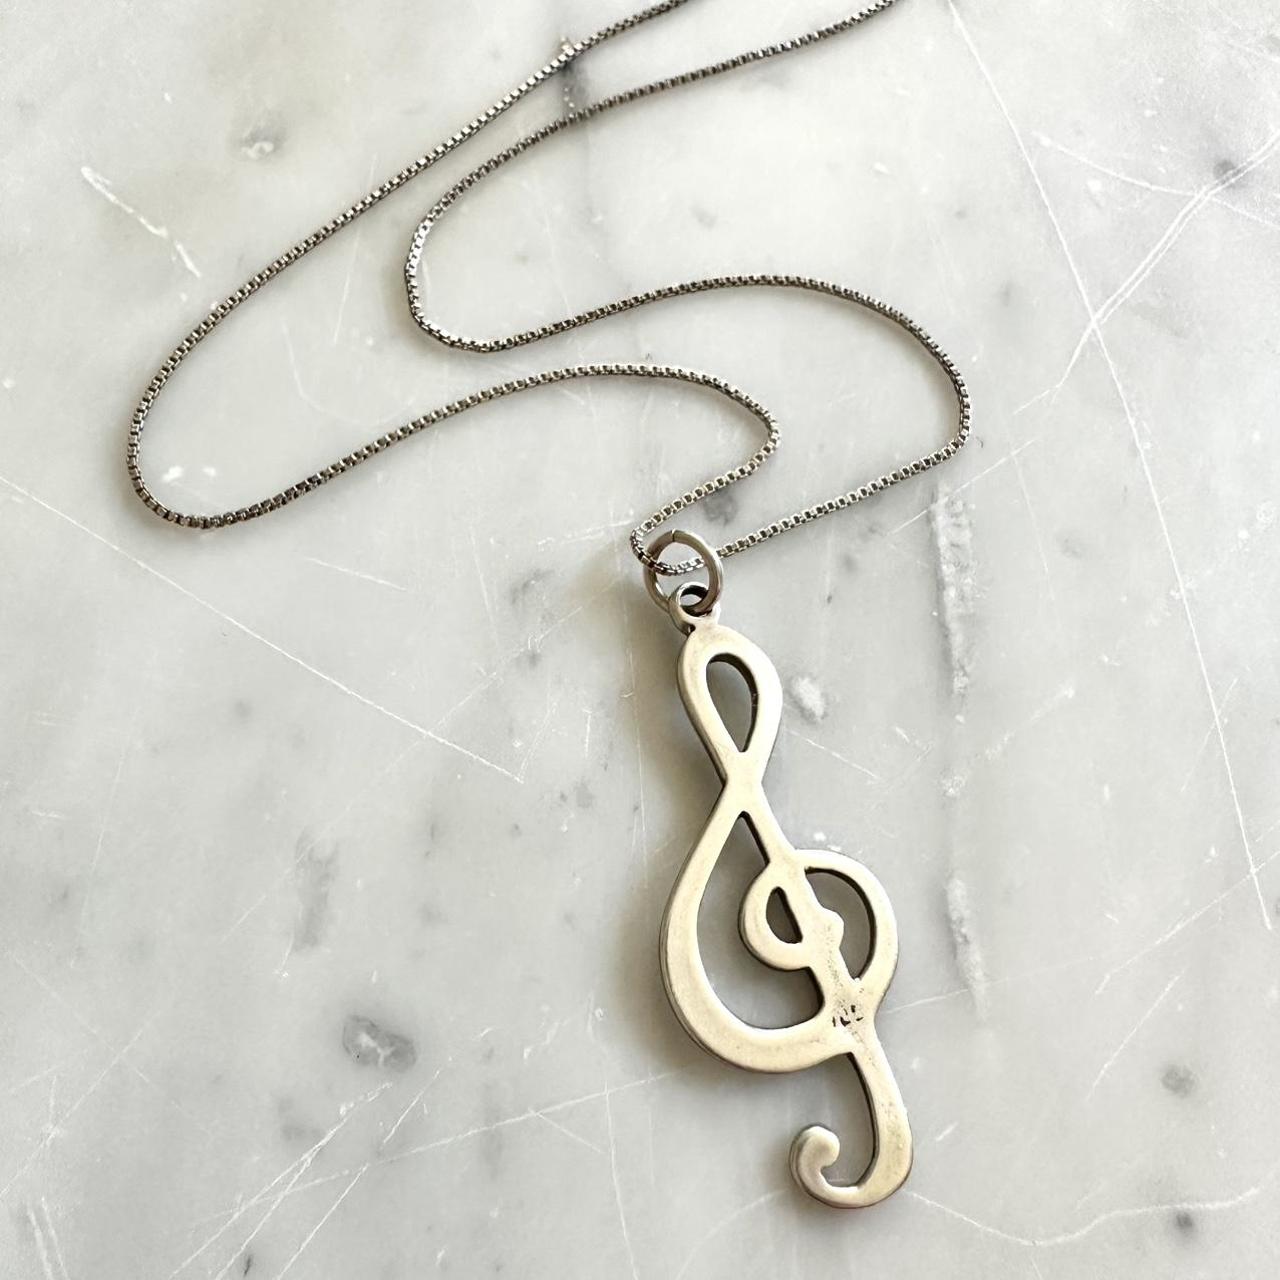 Large Music Note Necklace pendant 30